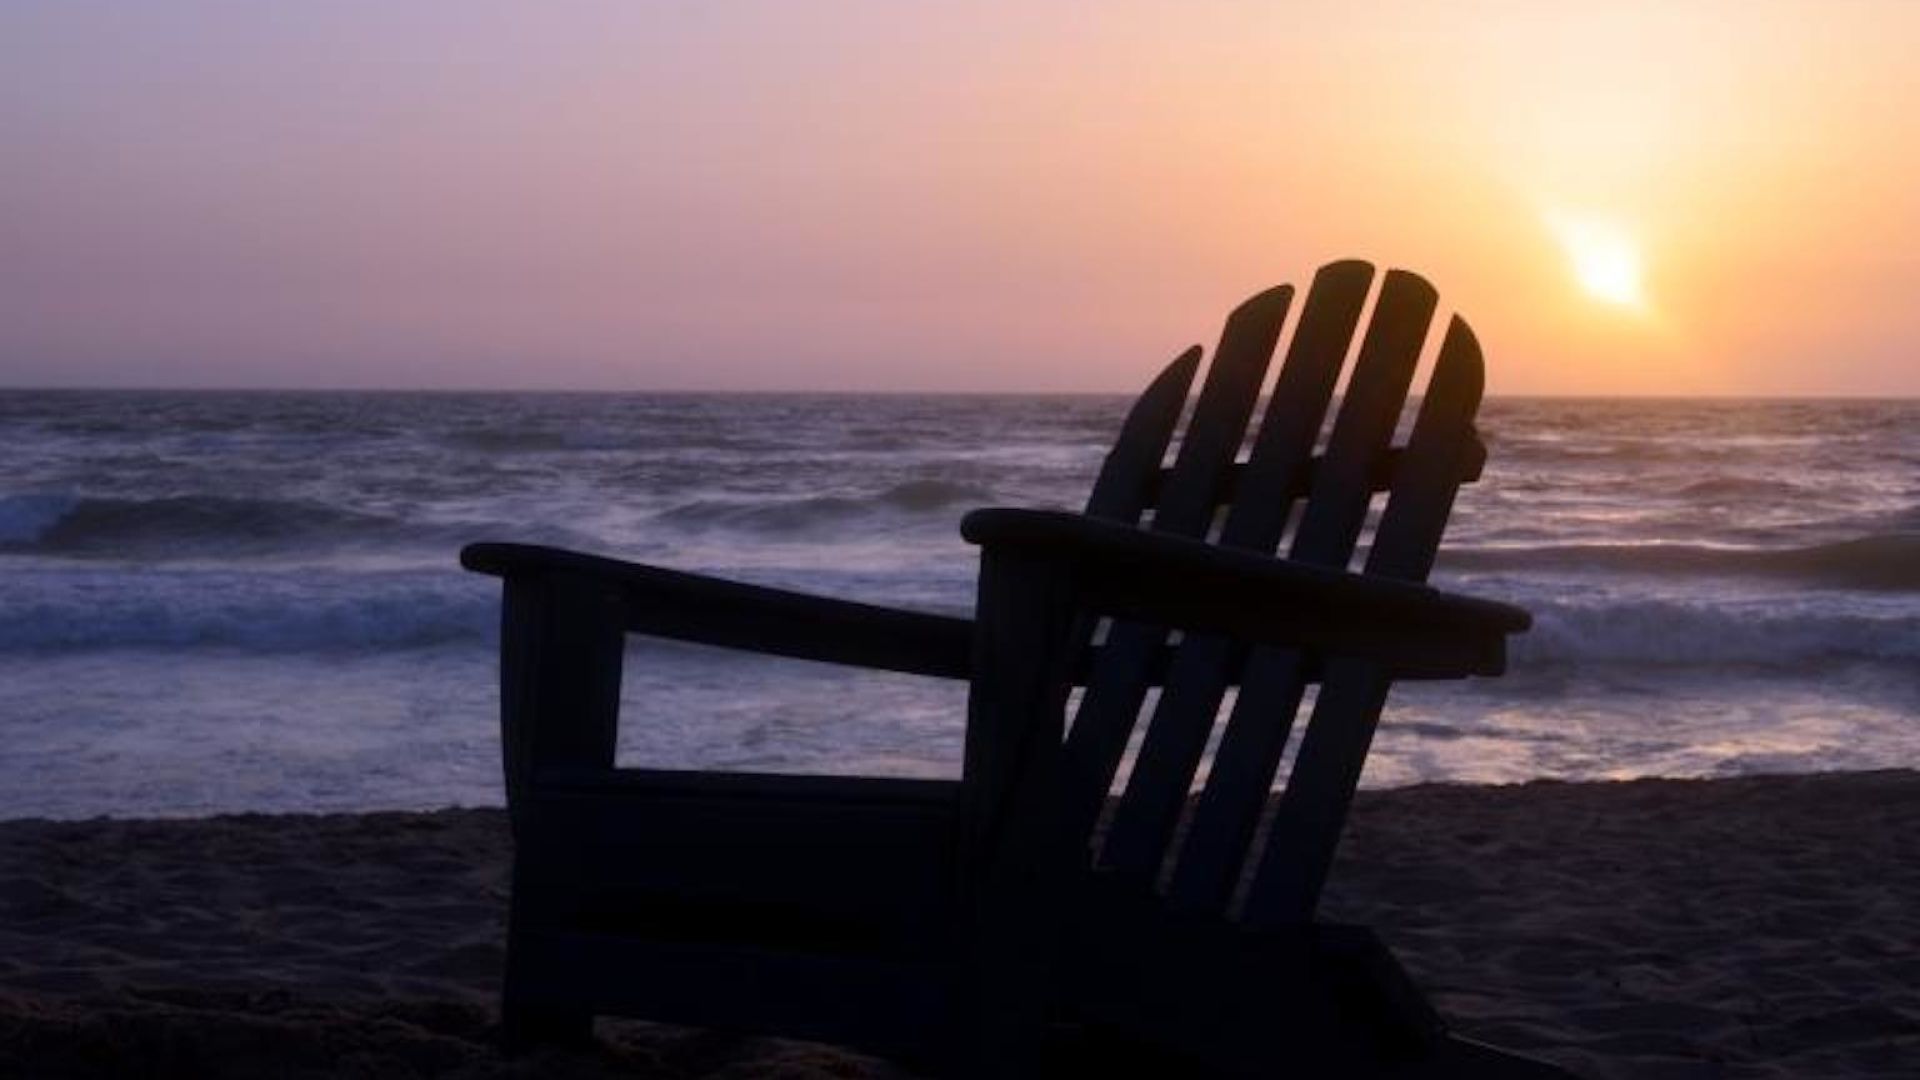 A Person Sitting On A Bench Overlooking The Ocean At Sunset